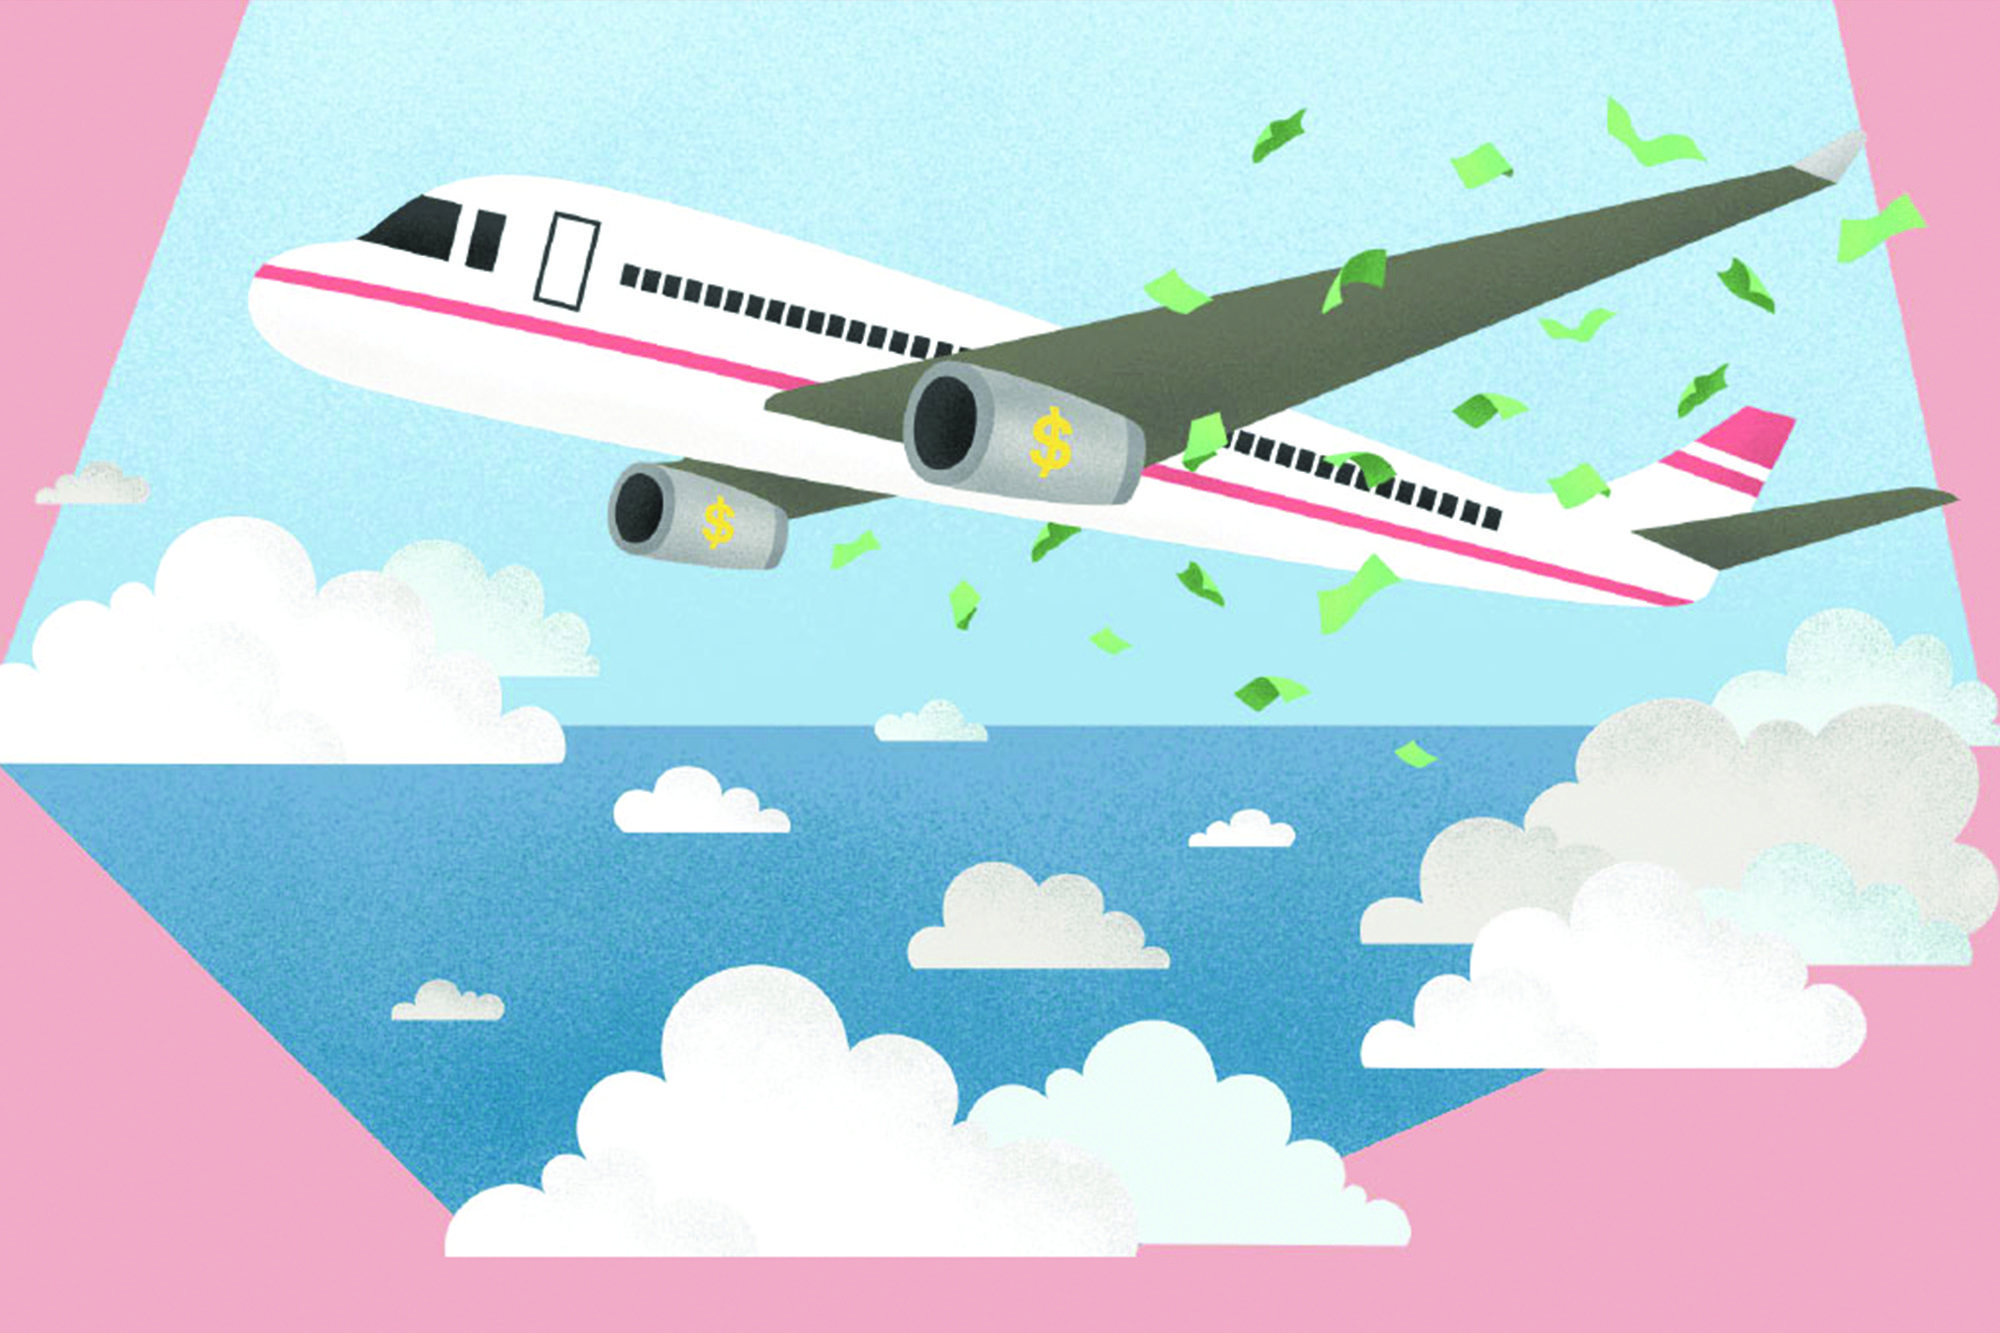 Long-haul, low-cost airlines delight customers with their prices. But many have had trouble generating profits.